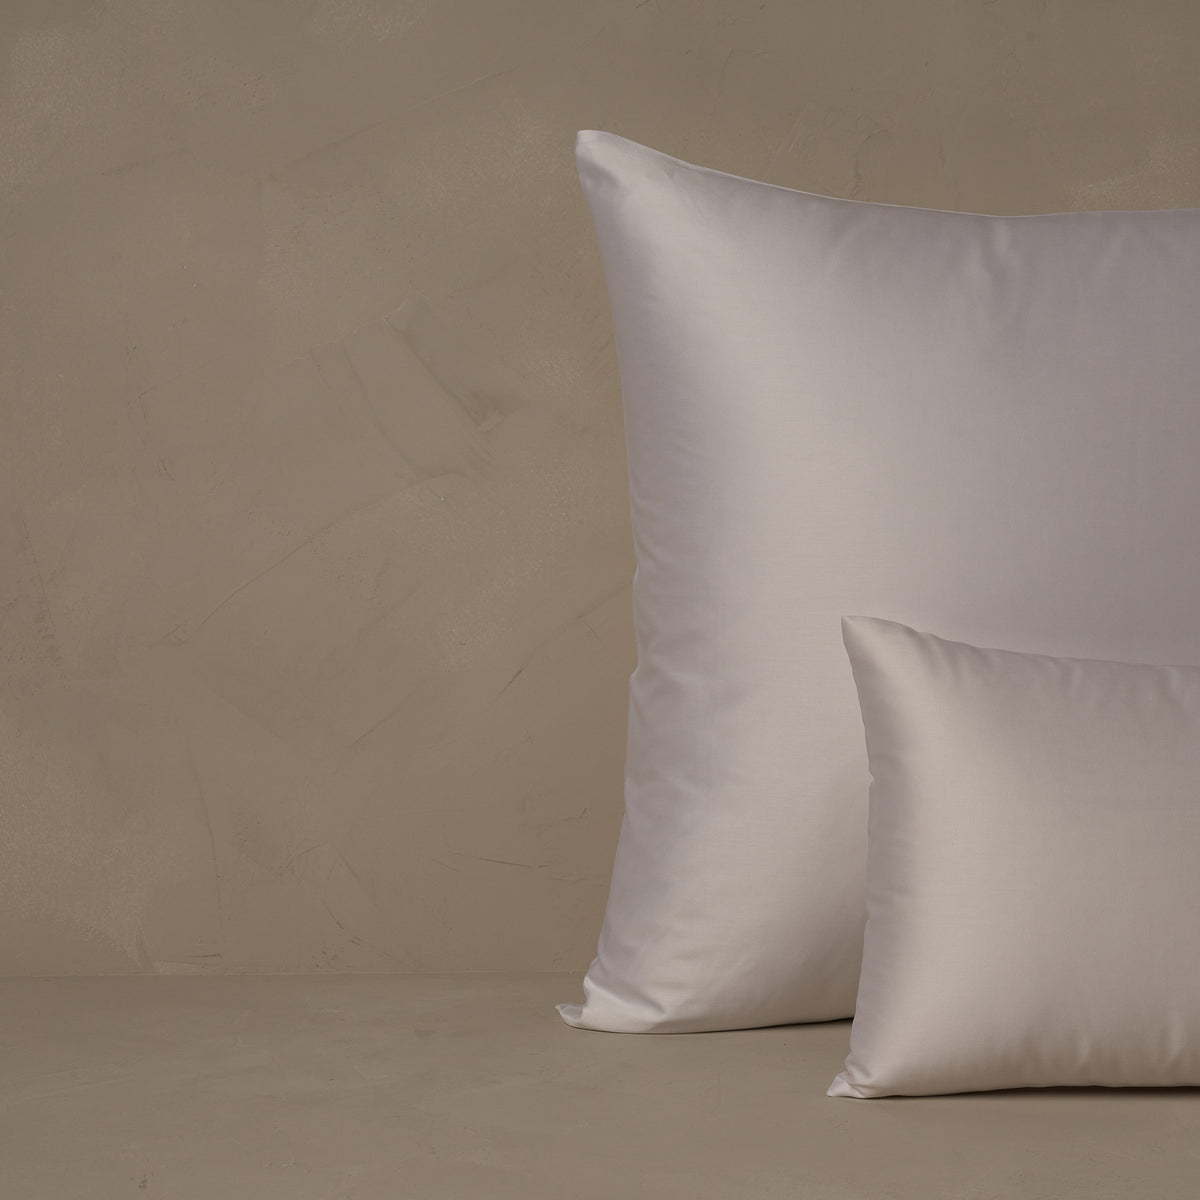 An image of a small boudoir or travel size pillow stacked in front of a large euro size pillow. The pillow cases are made in Italy of LETTO Americano Cotton Sateen in color white, a warm and buttery American grown Supima cotton. data-image-id=